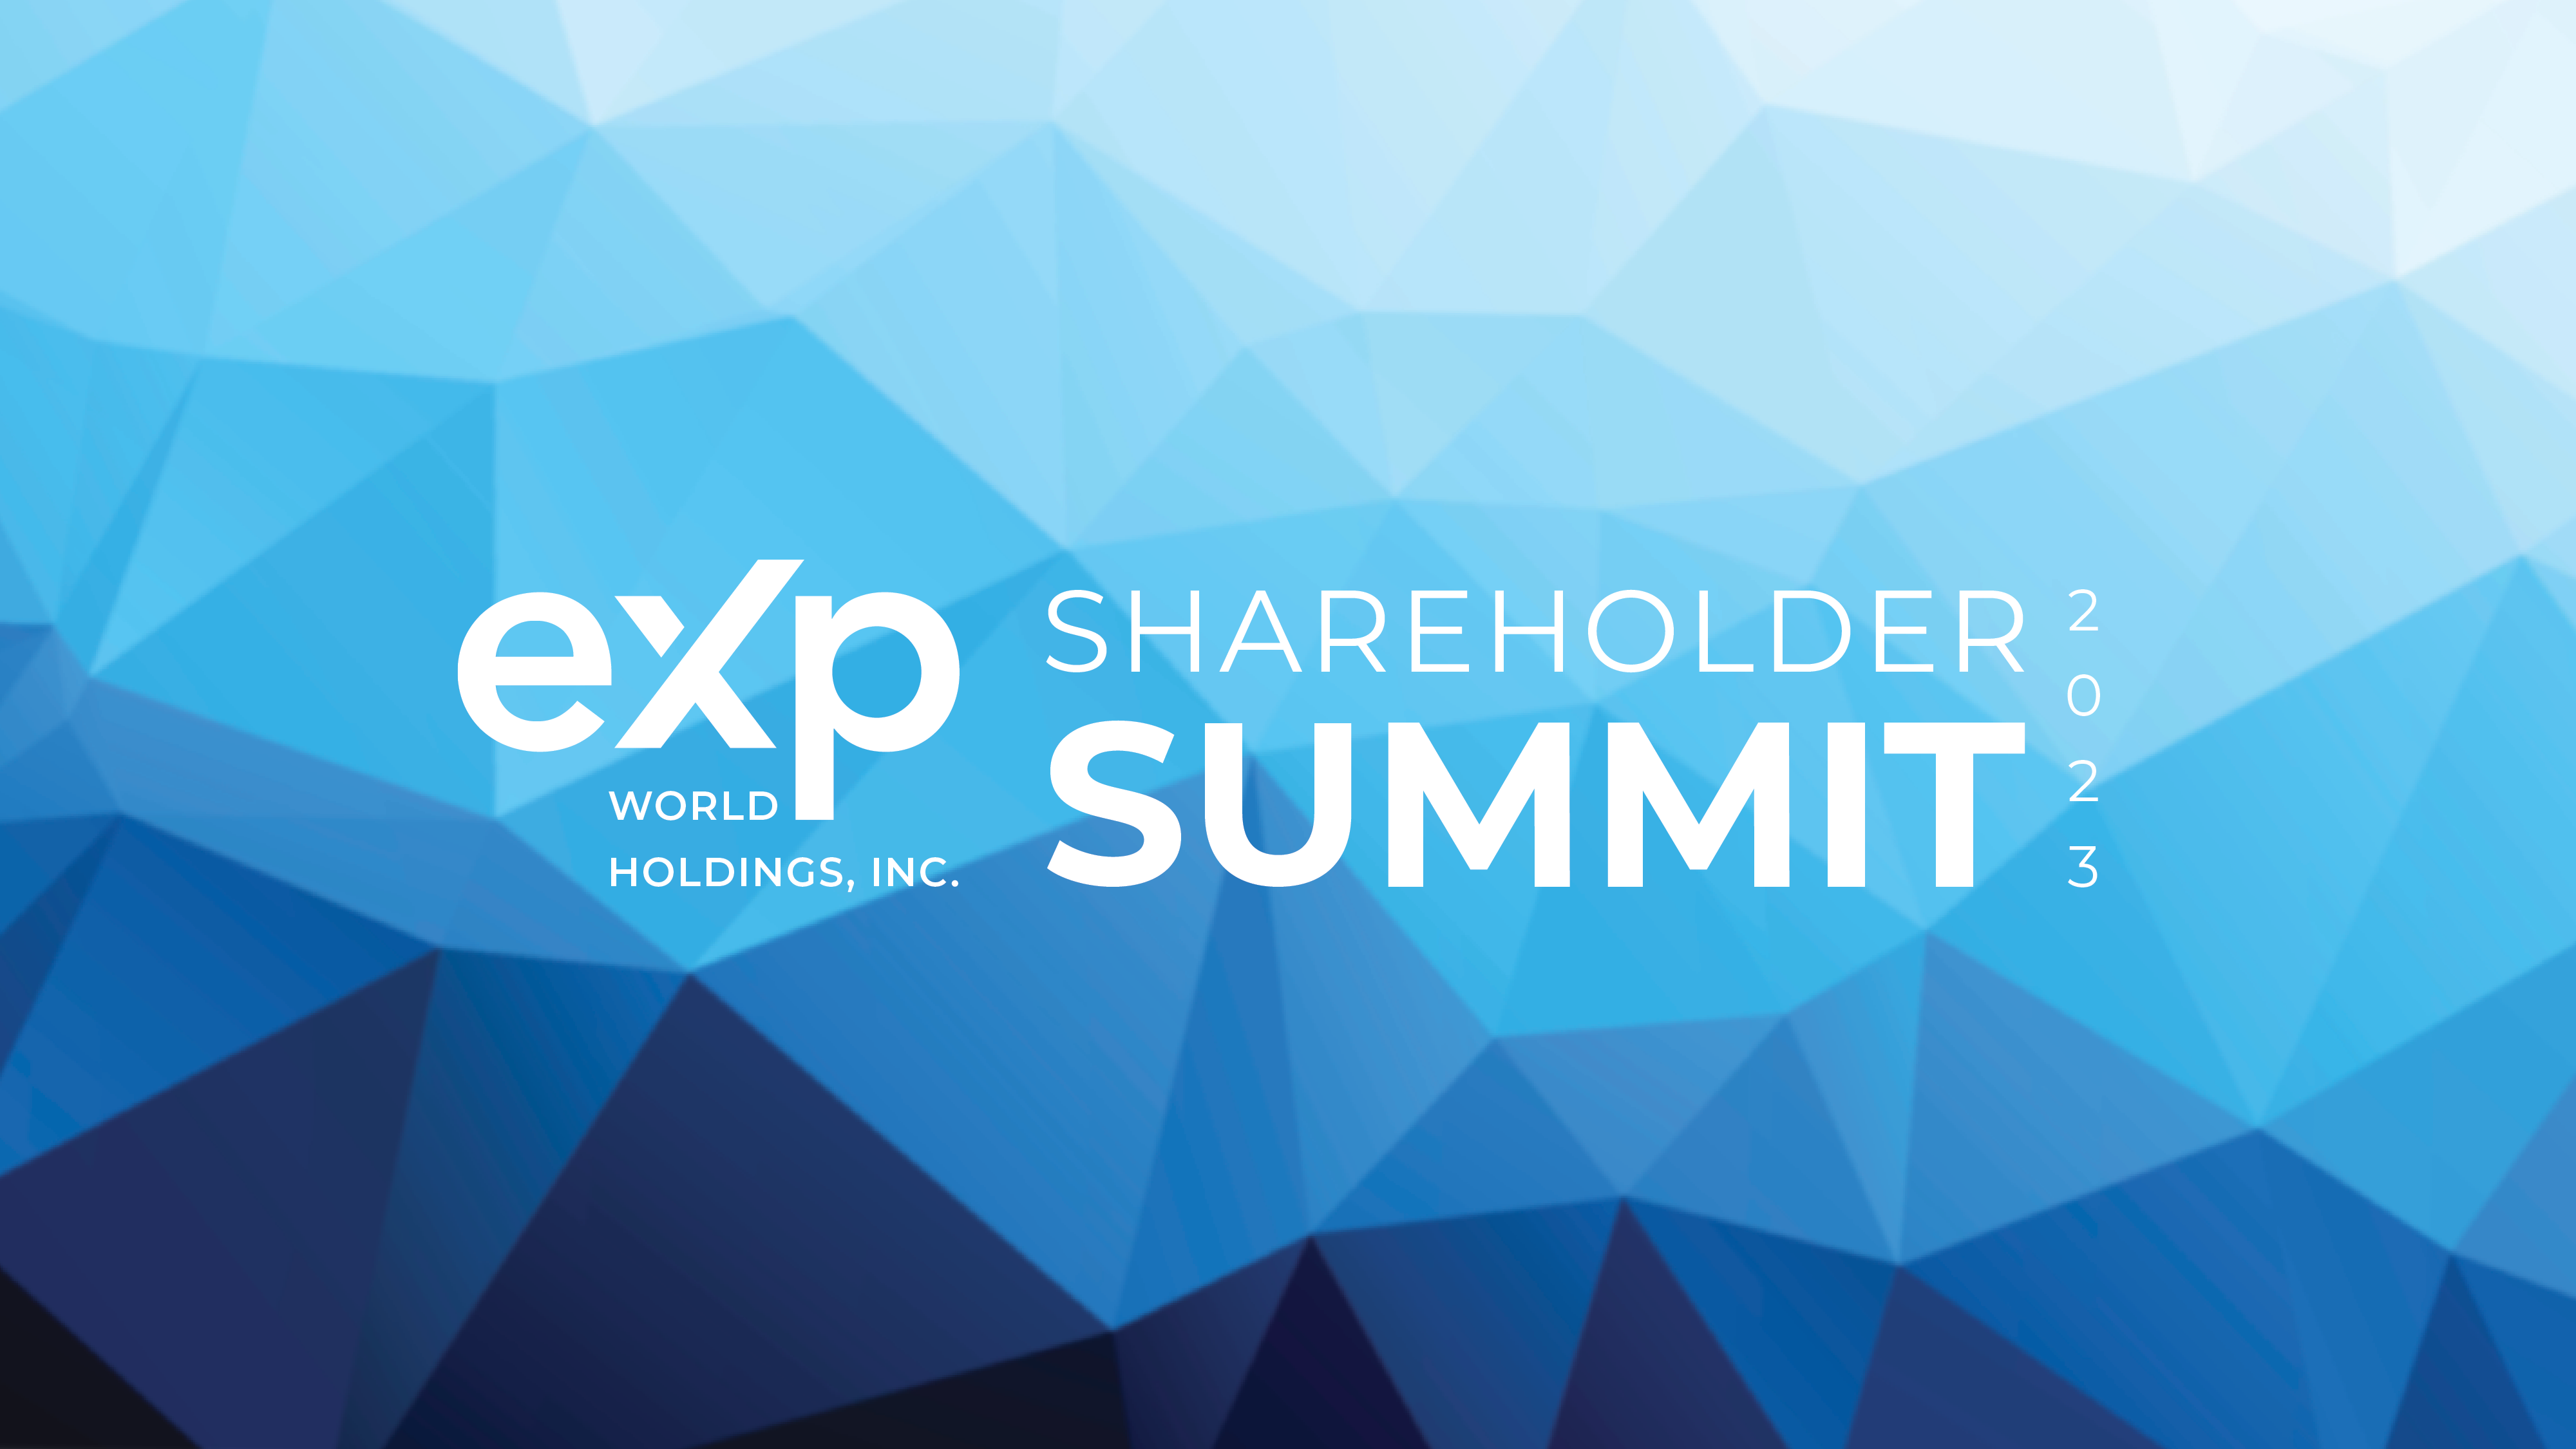 pricing The eXp Shareholder Summit